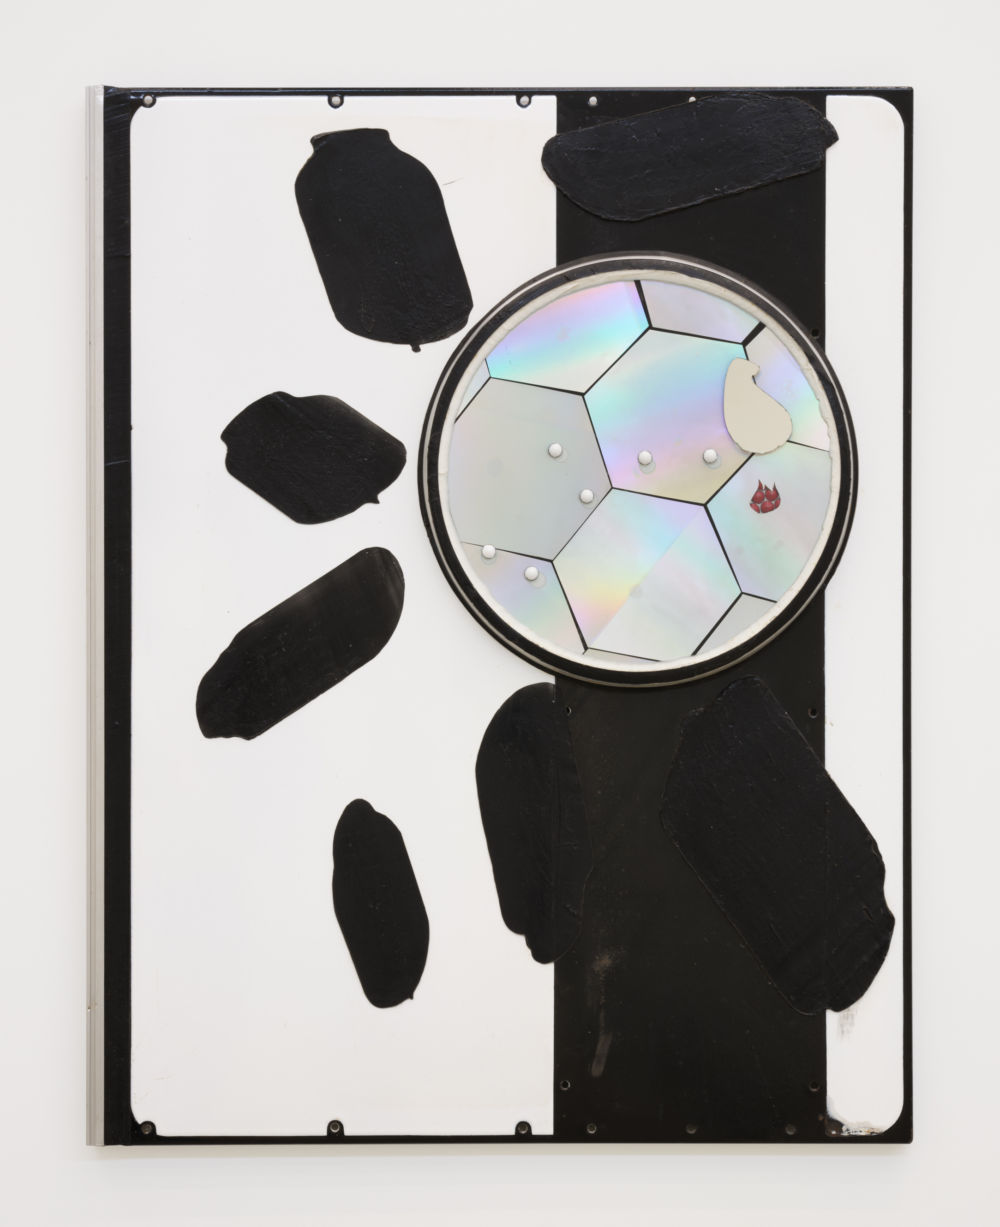 Jerry Pethick, Adjusting the Dial, 1986–1987, mixed media, 36 3/4 x 28 3/4 x 1 5/8 in. (93 x 73 x 4 cm) by 